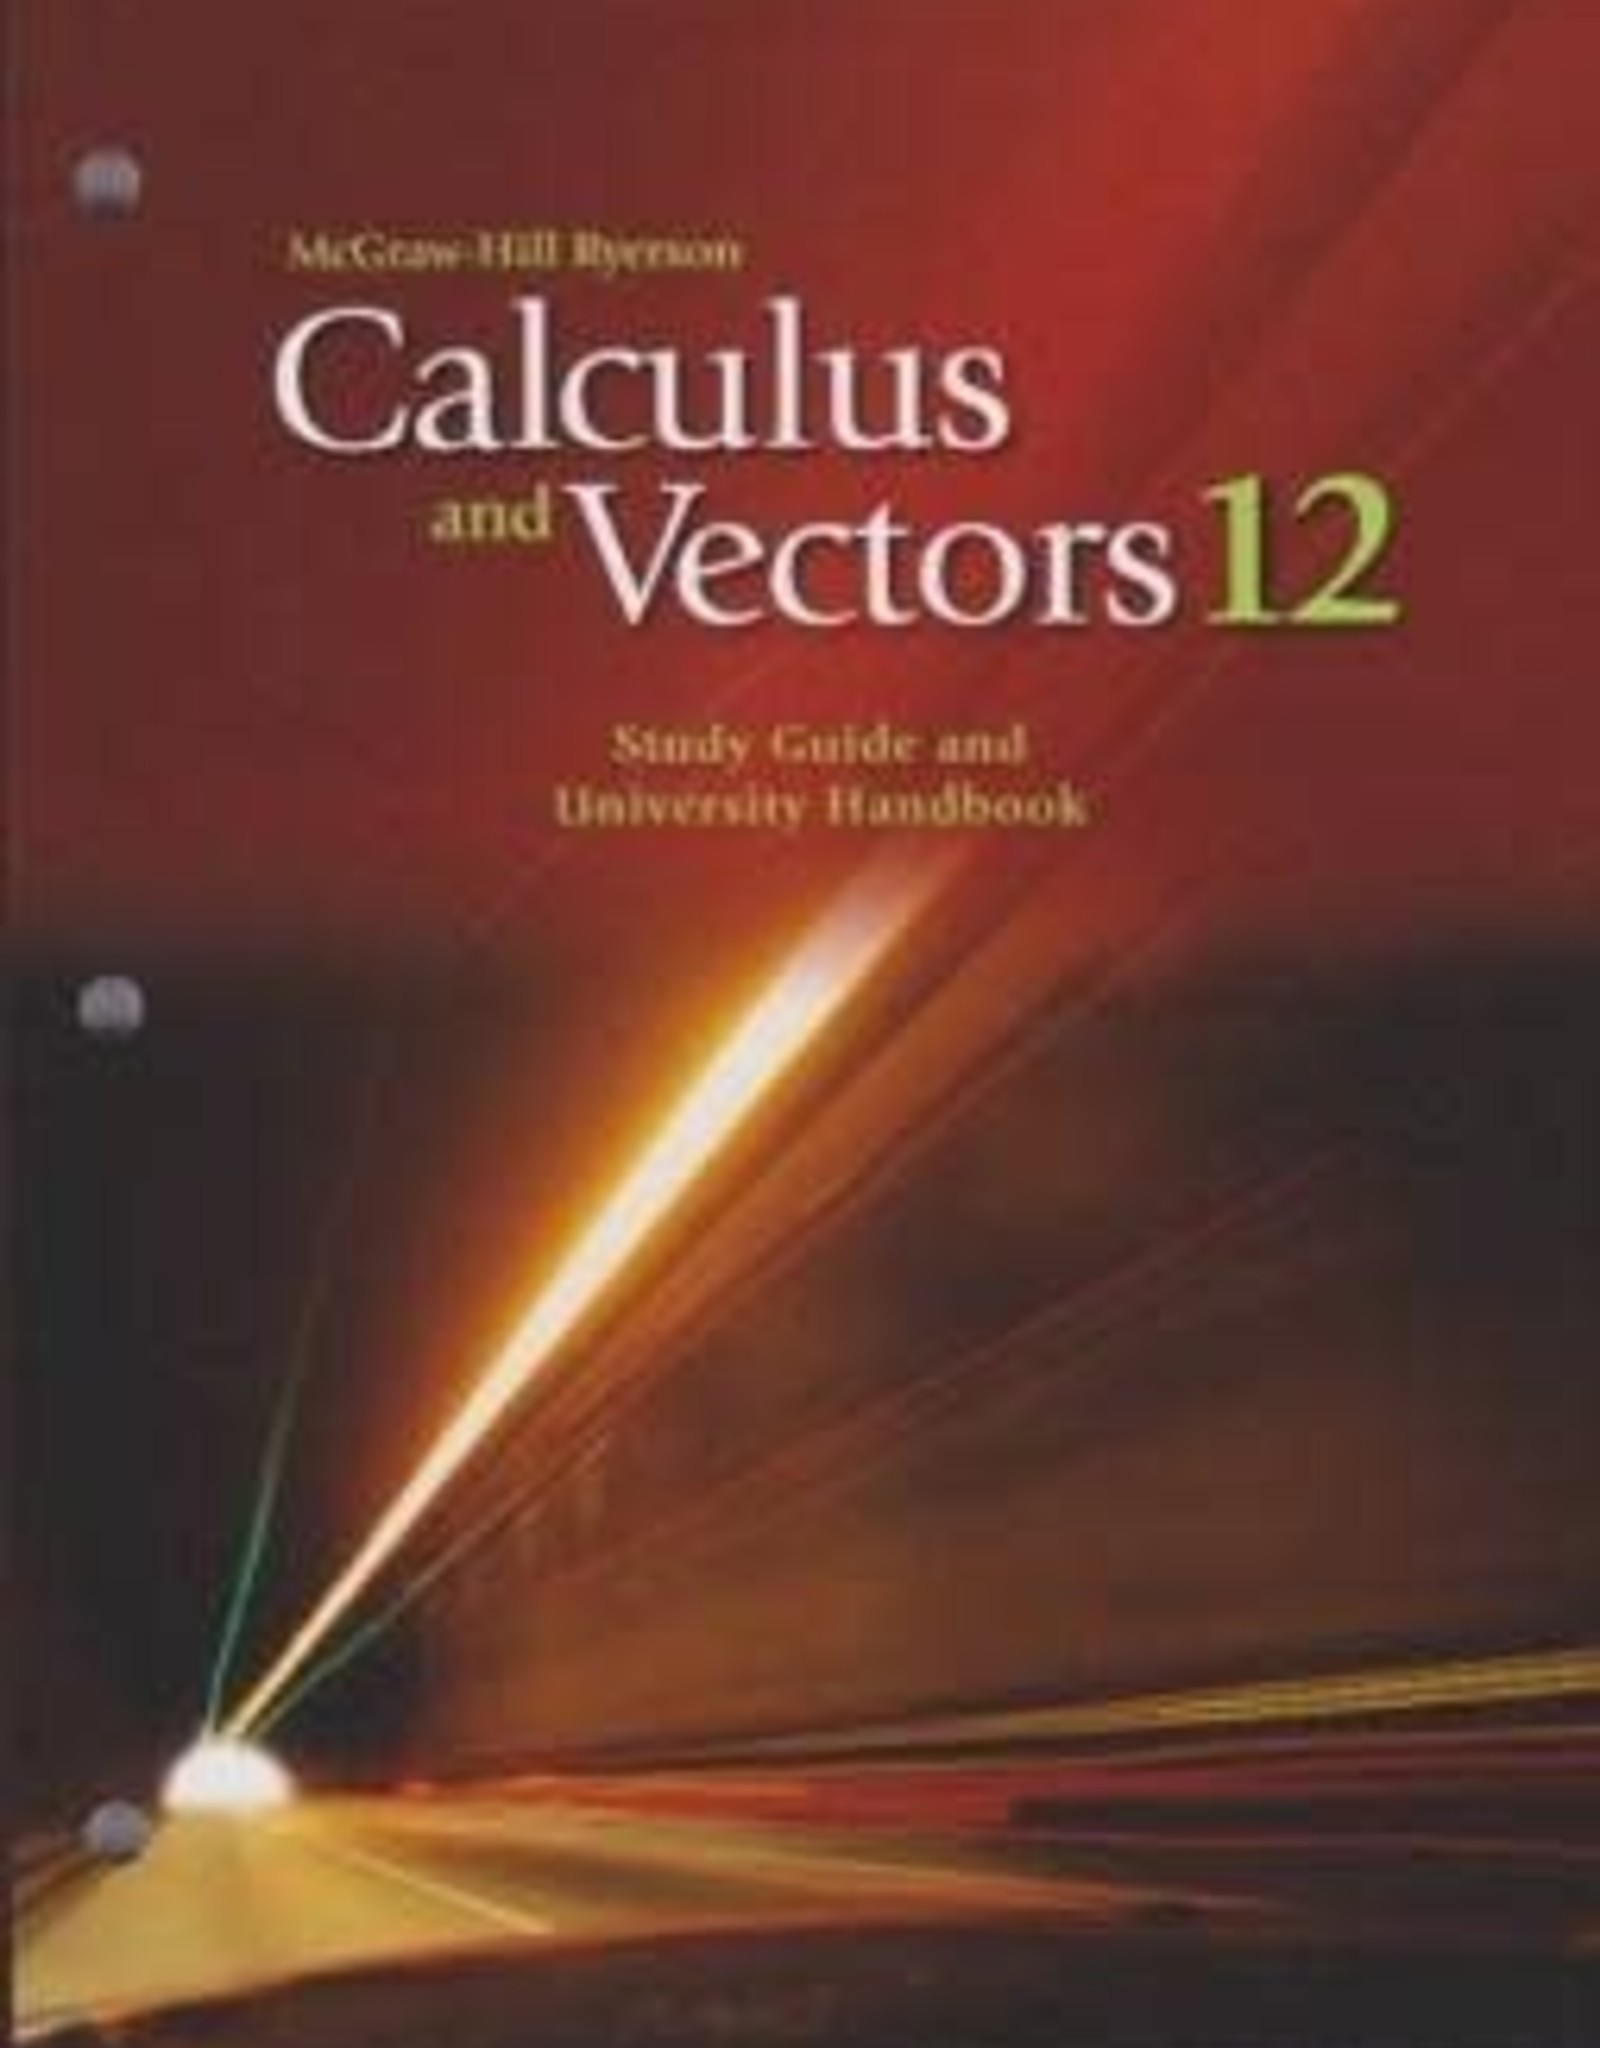 Calculus & Vector 12- Study Guide